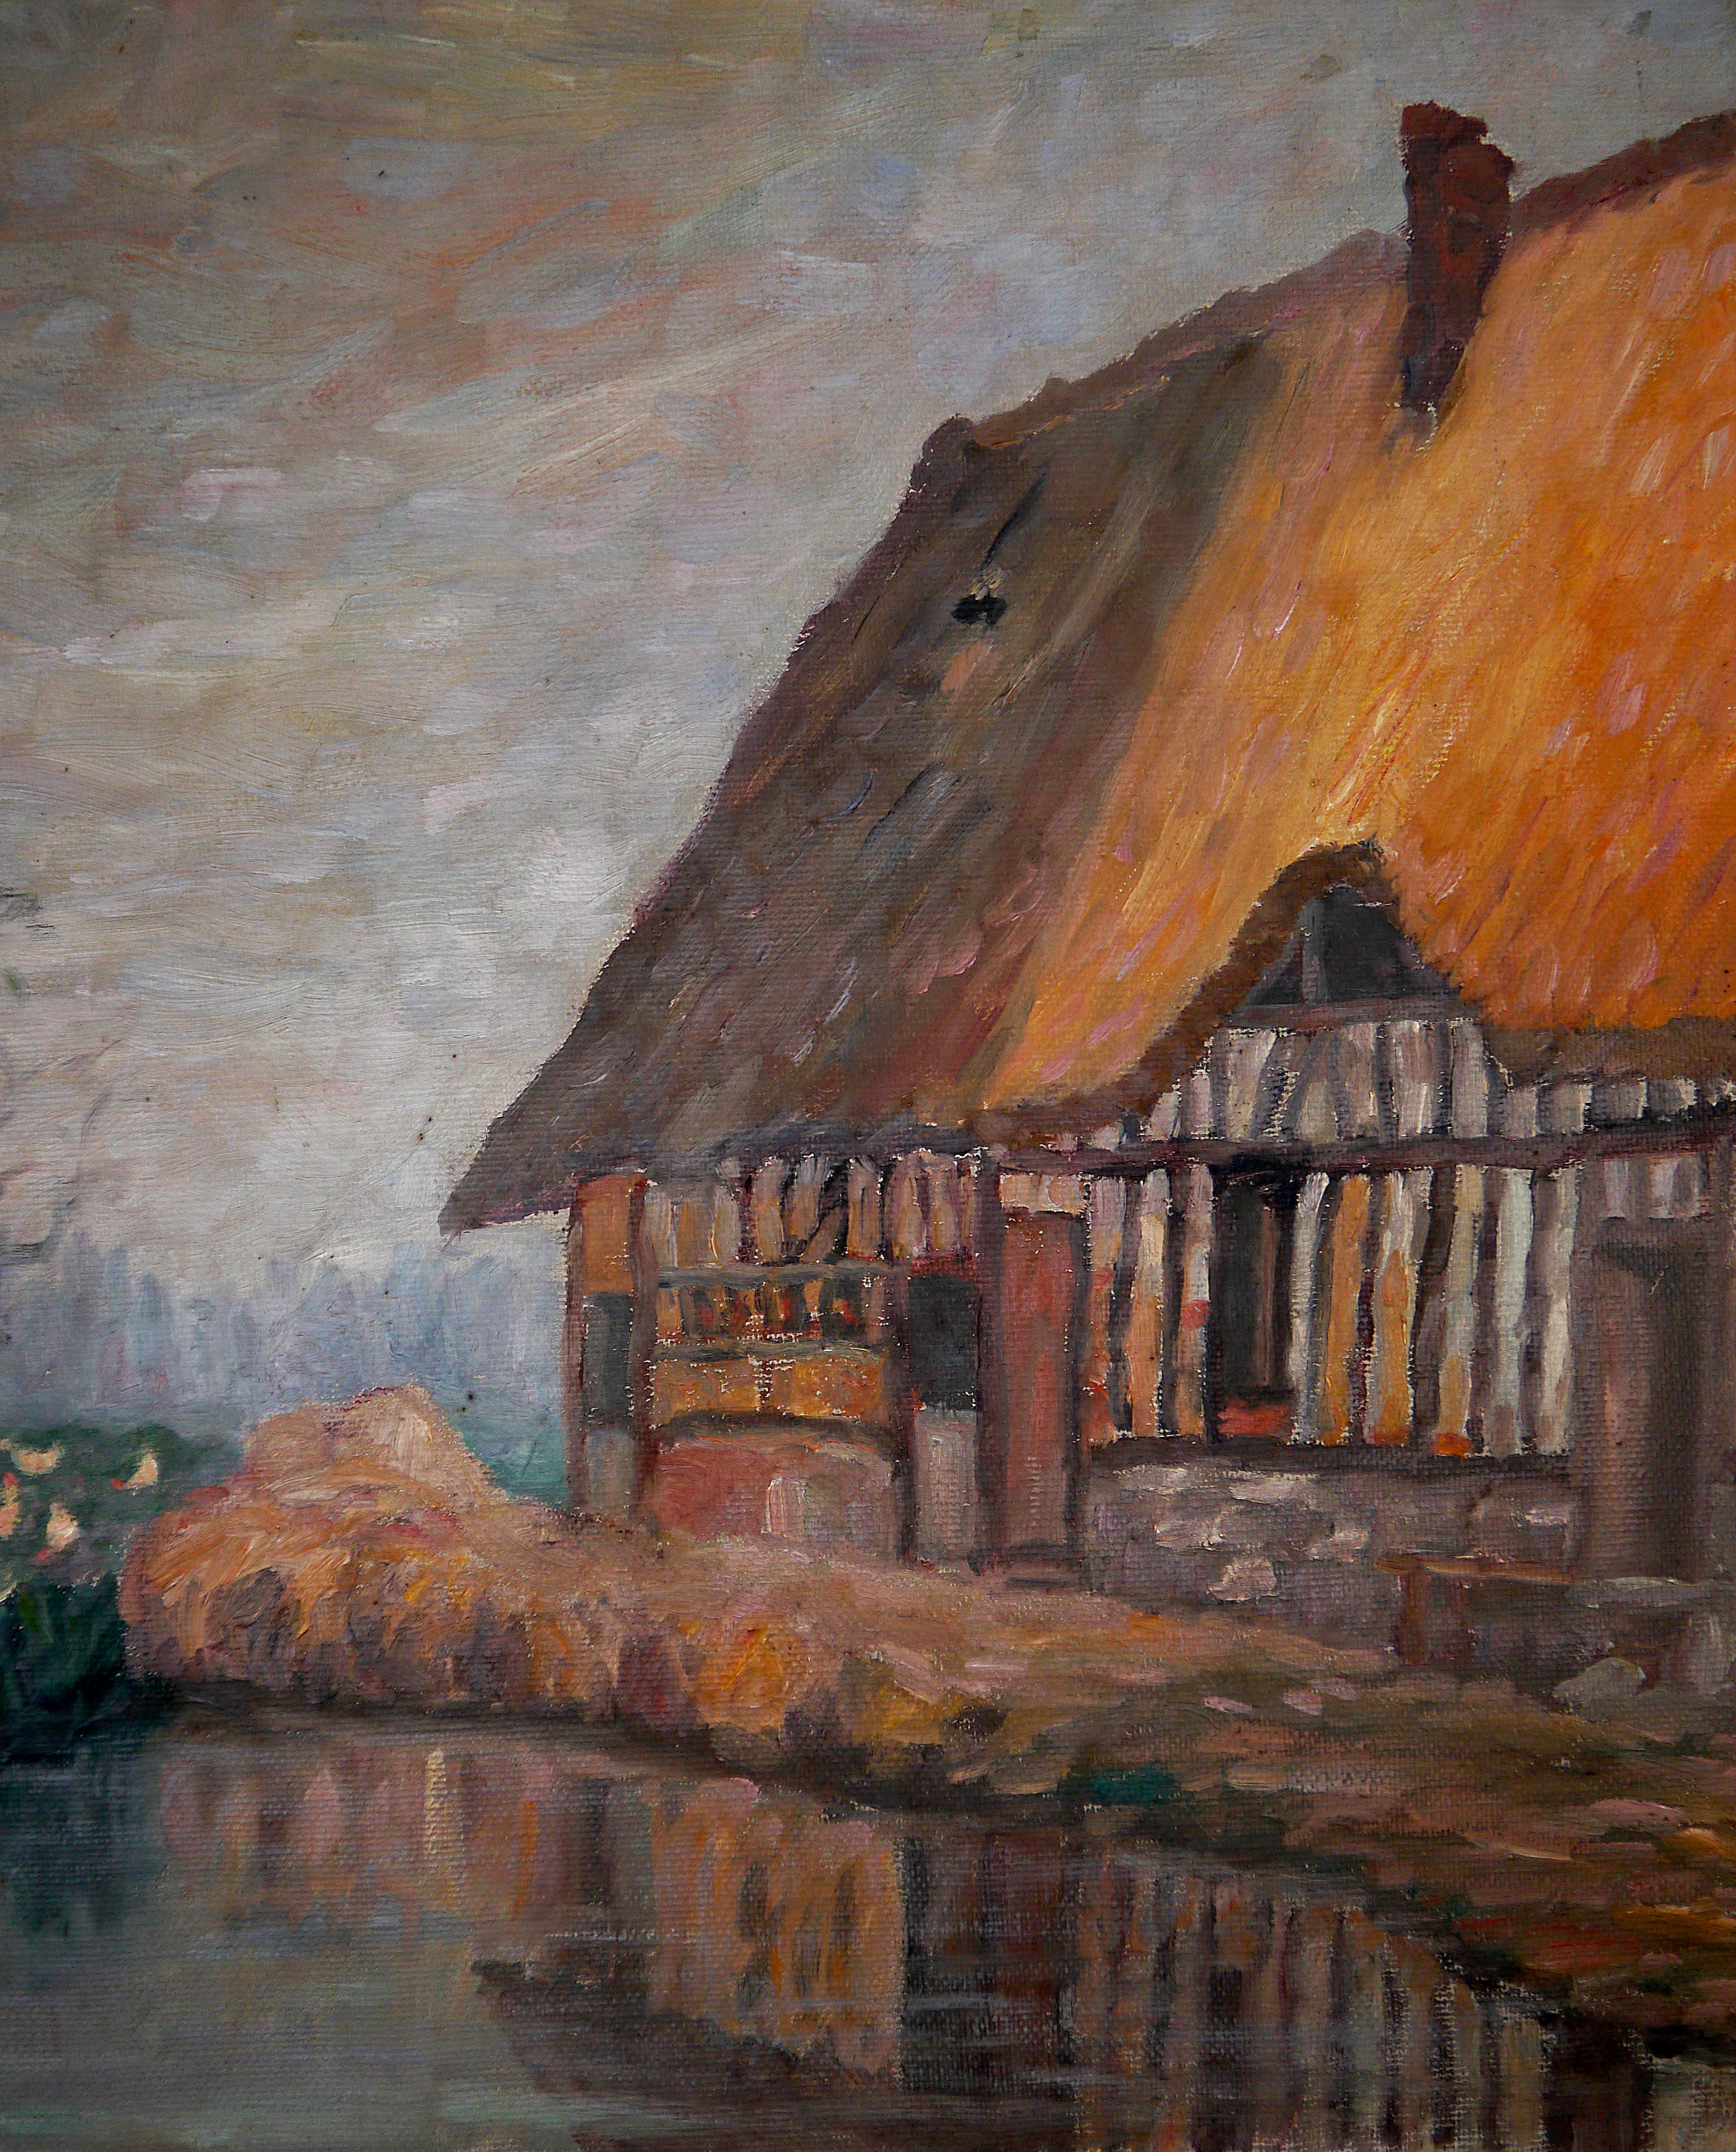  Landscape river and barn _  from Georges Gratigny 

Georges Gratigny was a French painter from XIX -XX. (1881-1970) Normandy
He was member of the society of Normans painters.
There are influence in his art of his friends André Hardy and Paul Emile